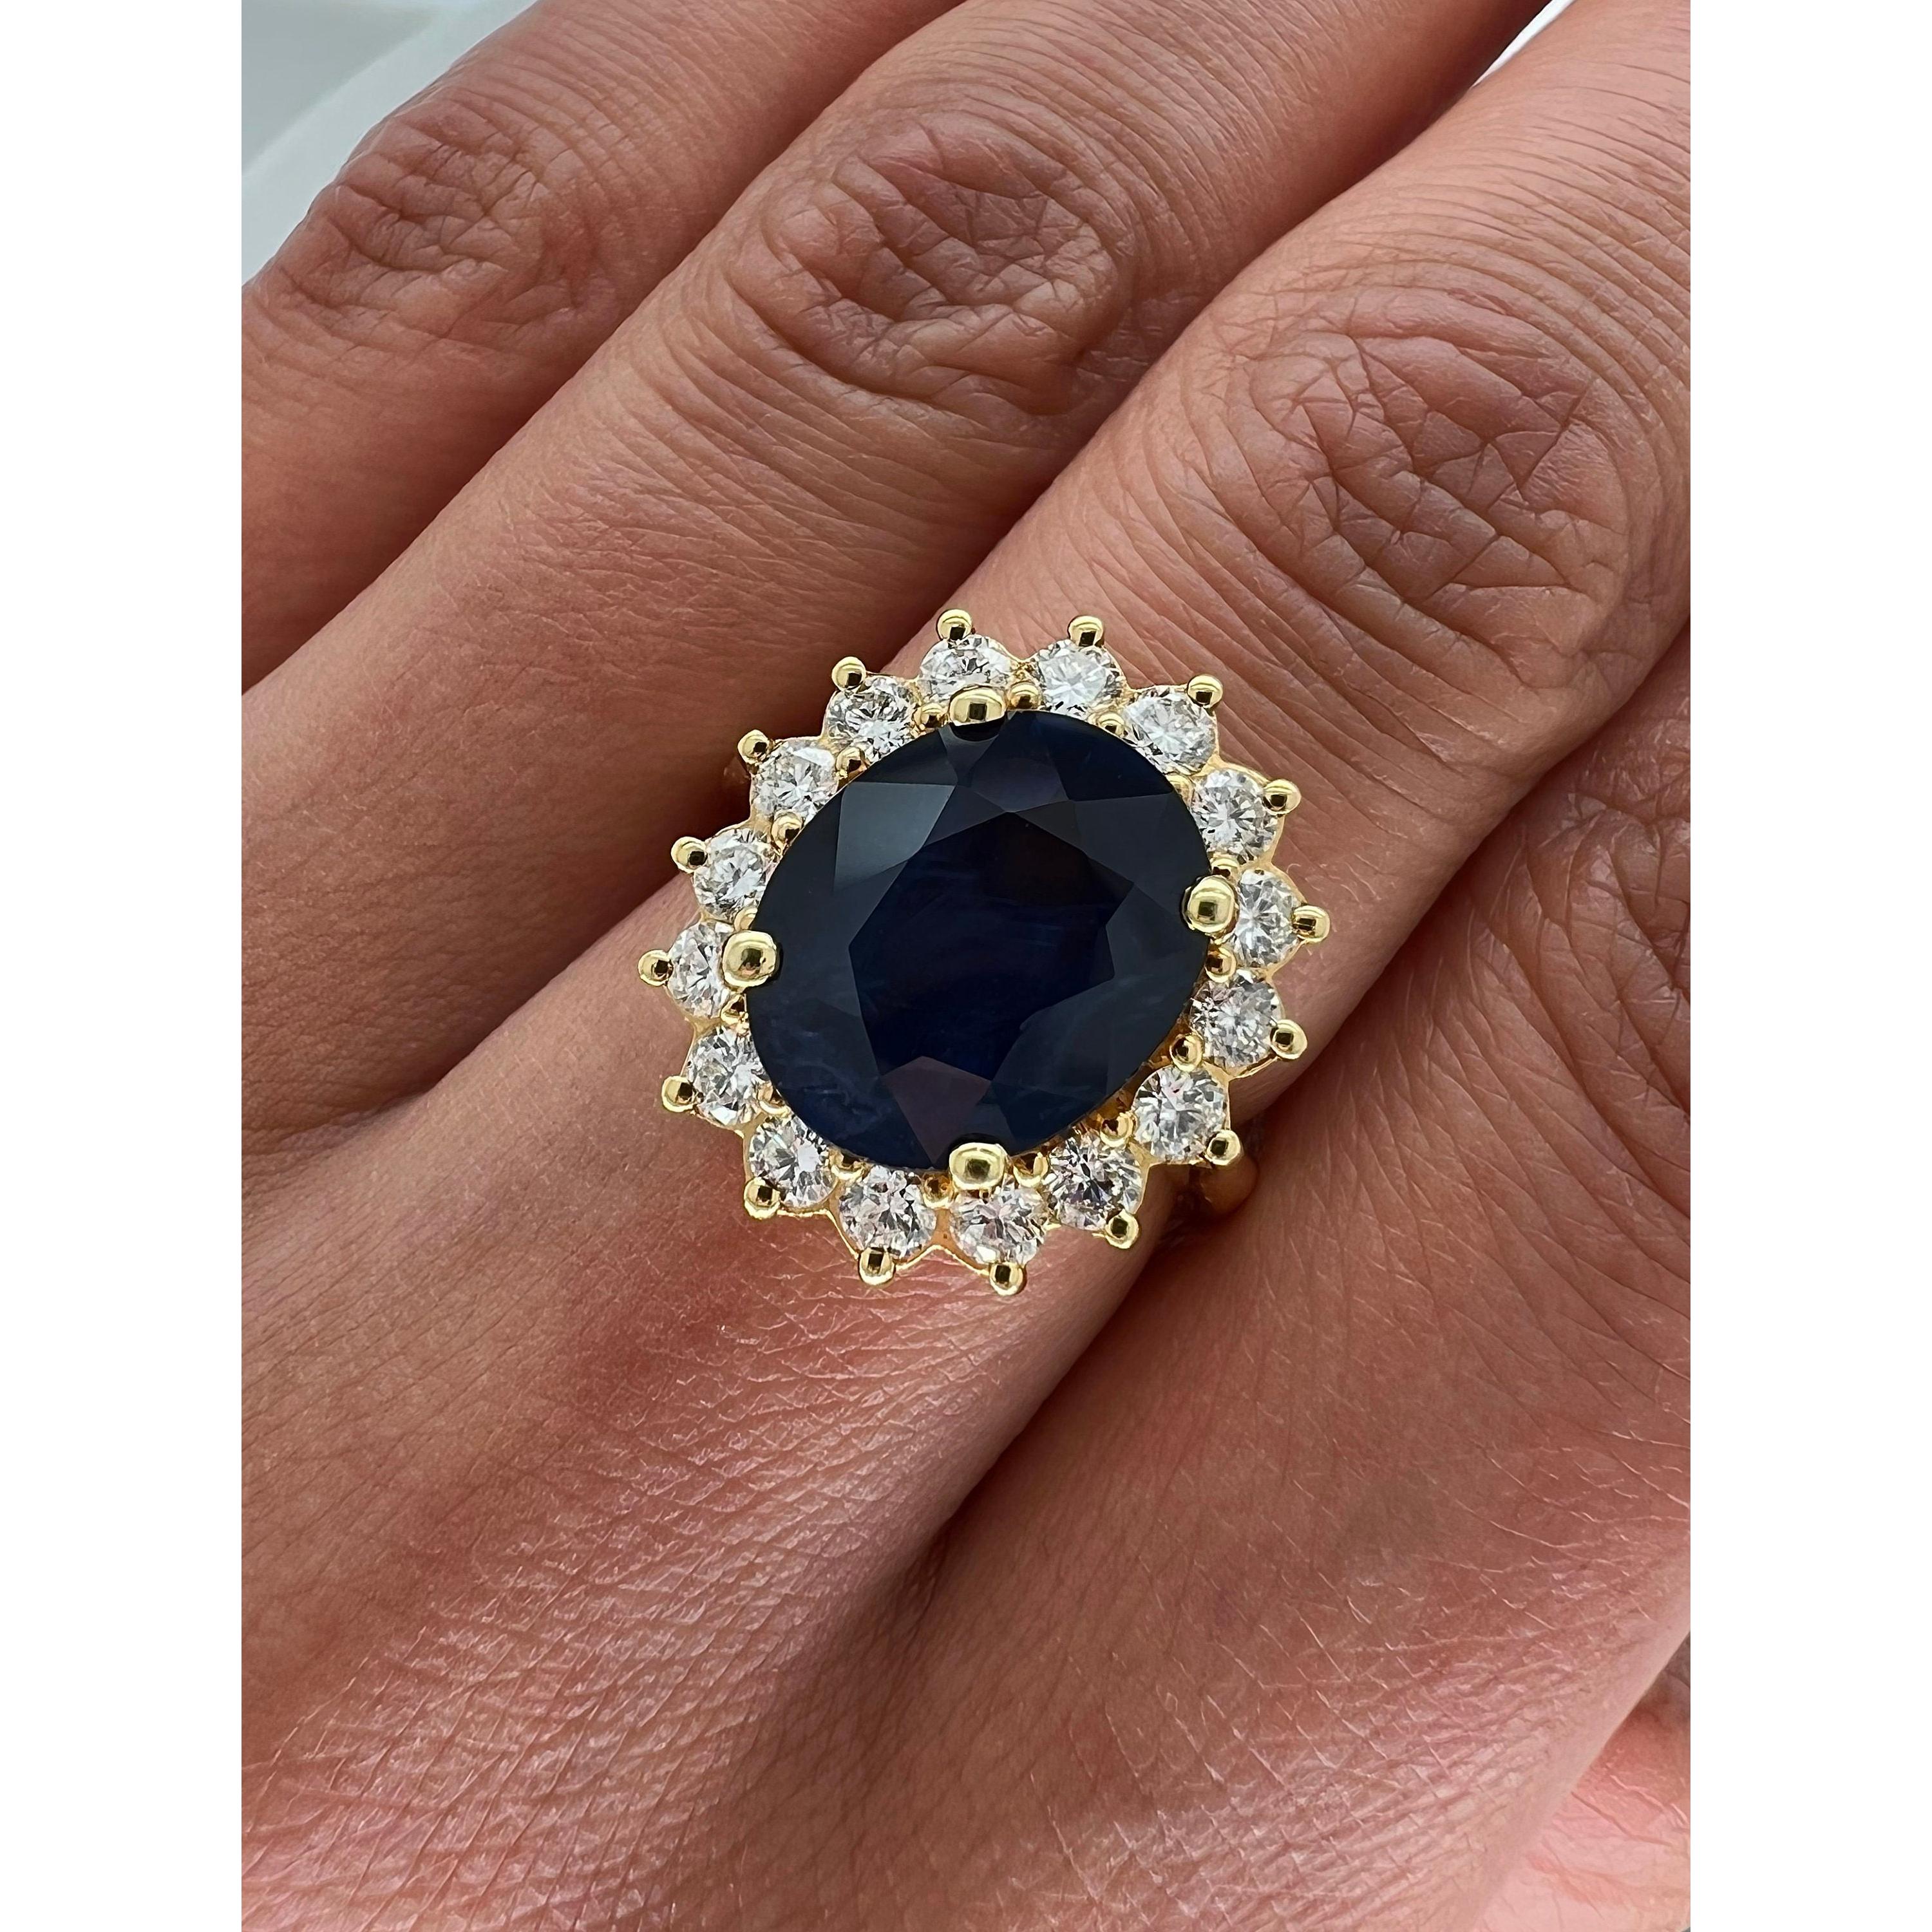 4.63 Carat Halo Blue Ceylon Sapphire Diamond Ring Floral Sapphire Ring in Gold In New Condition For Sale In Orlando, Florida